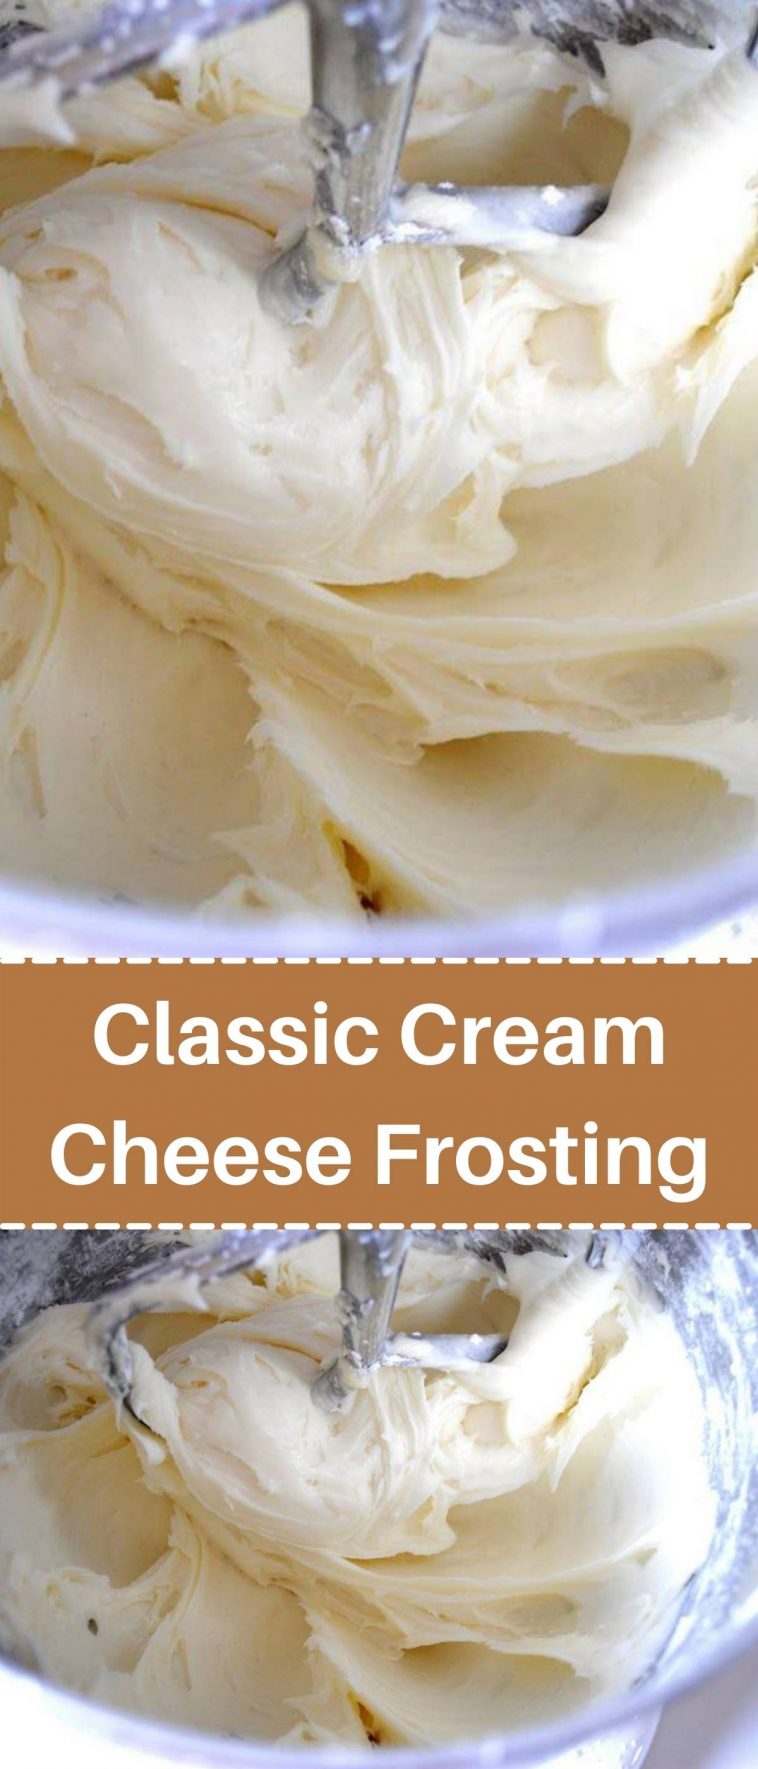 Classic Cream Cheese Frosting